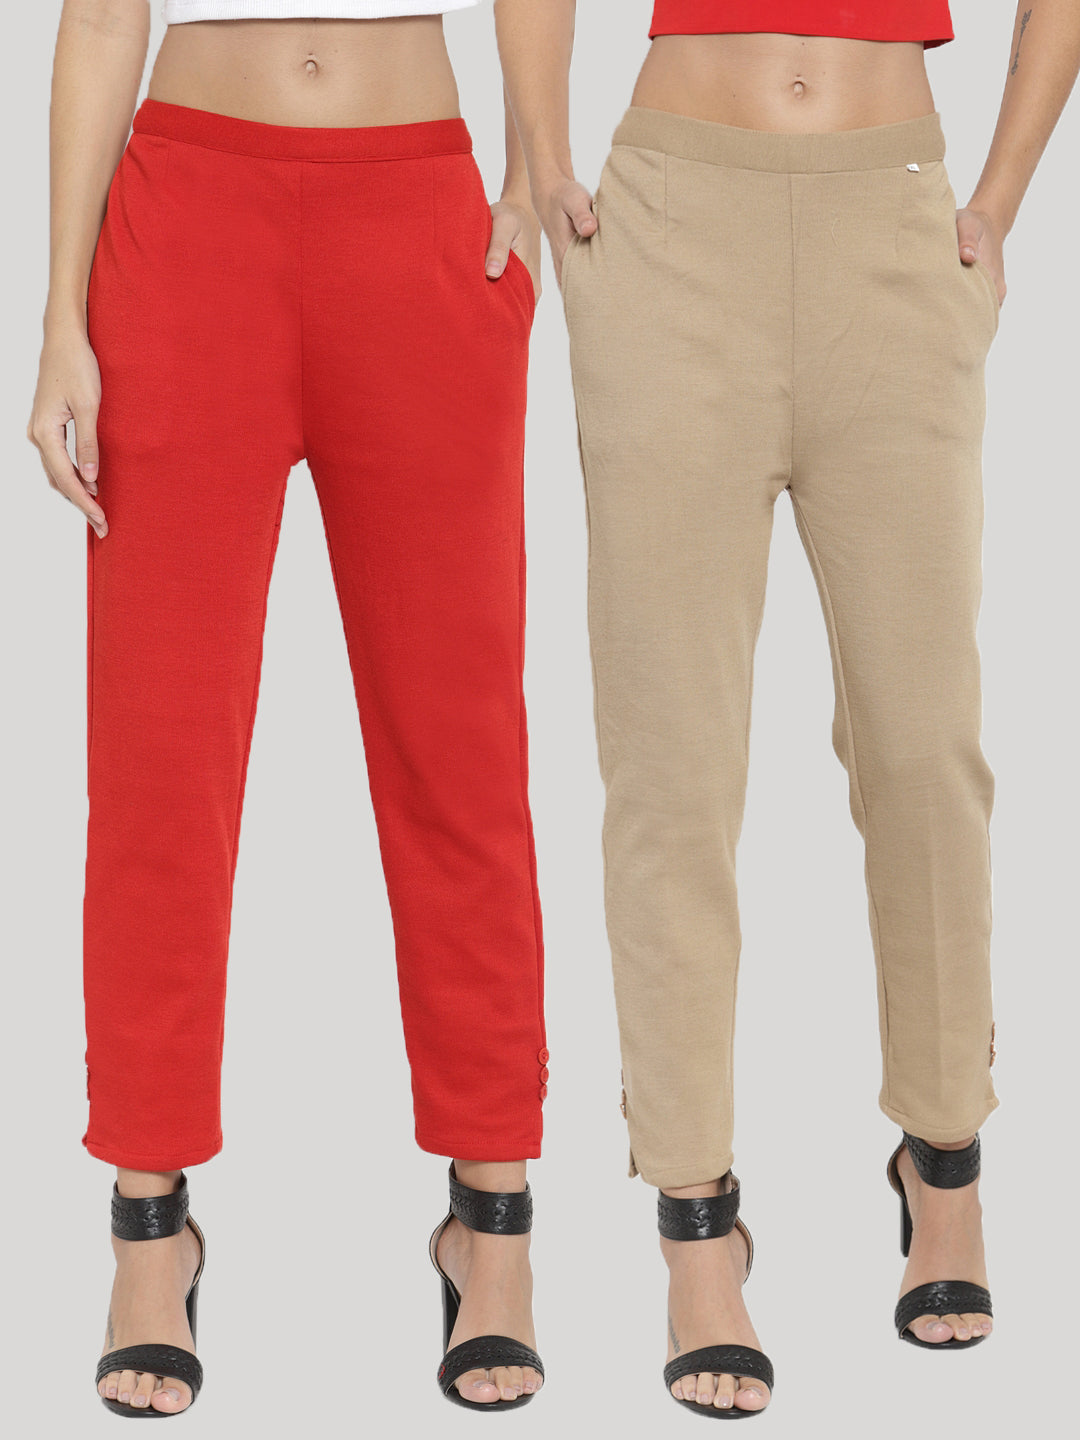 Clora Red & Light Fawn Solid Woolen Trouser (Pack of 2)